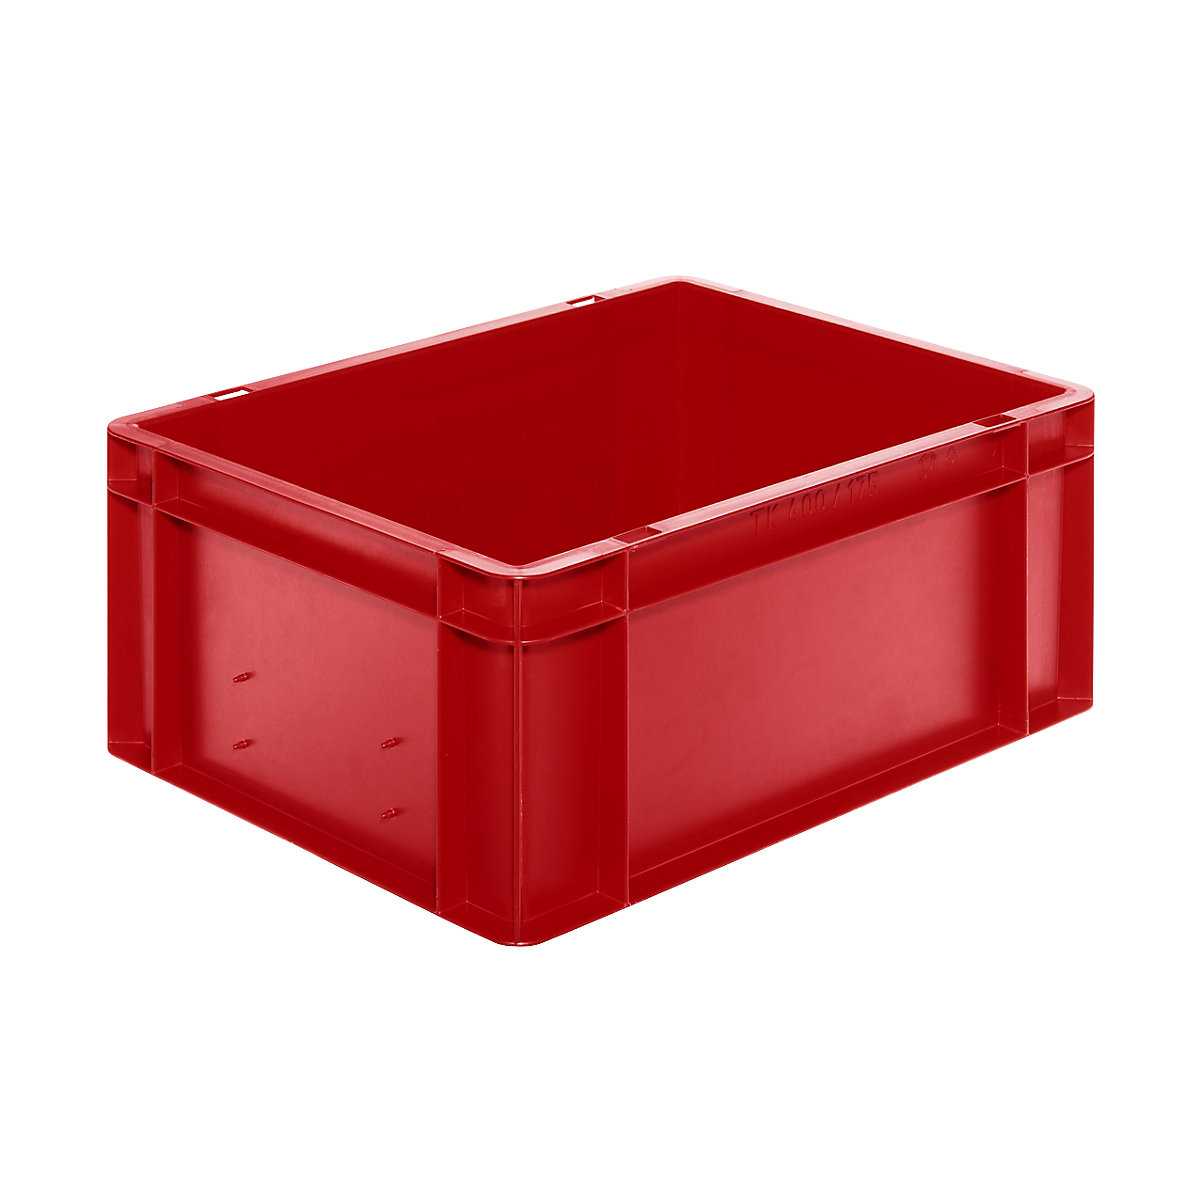 Euro stacking container, closed walls and base, LxWxH 400 x 300 x 175 mm, red, pack of 5-7